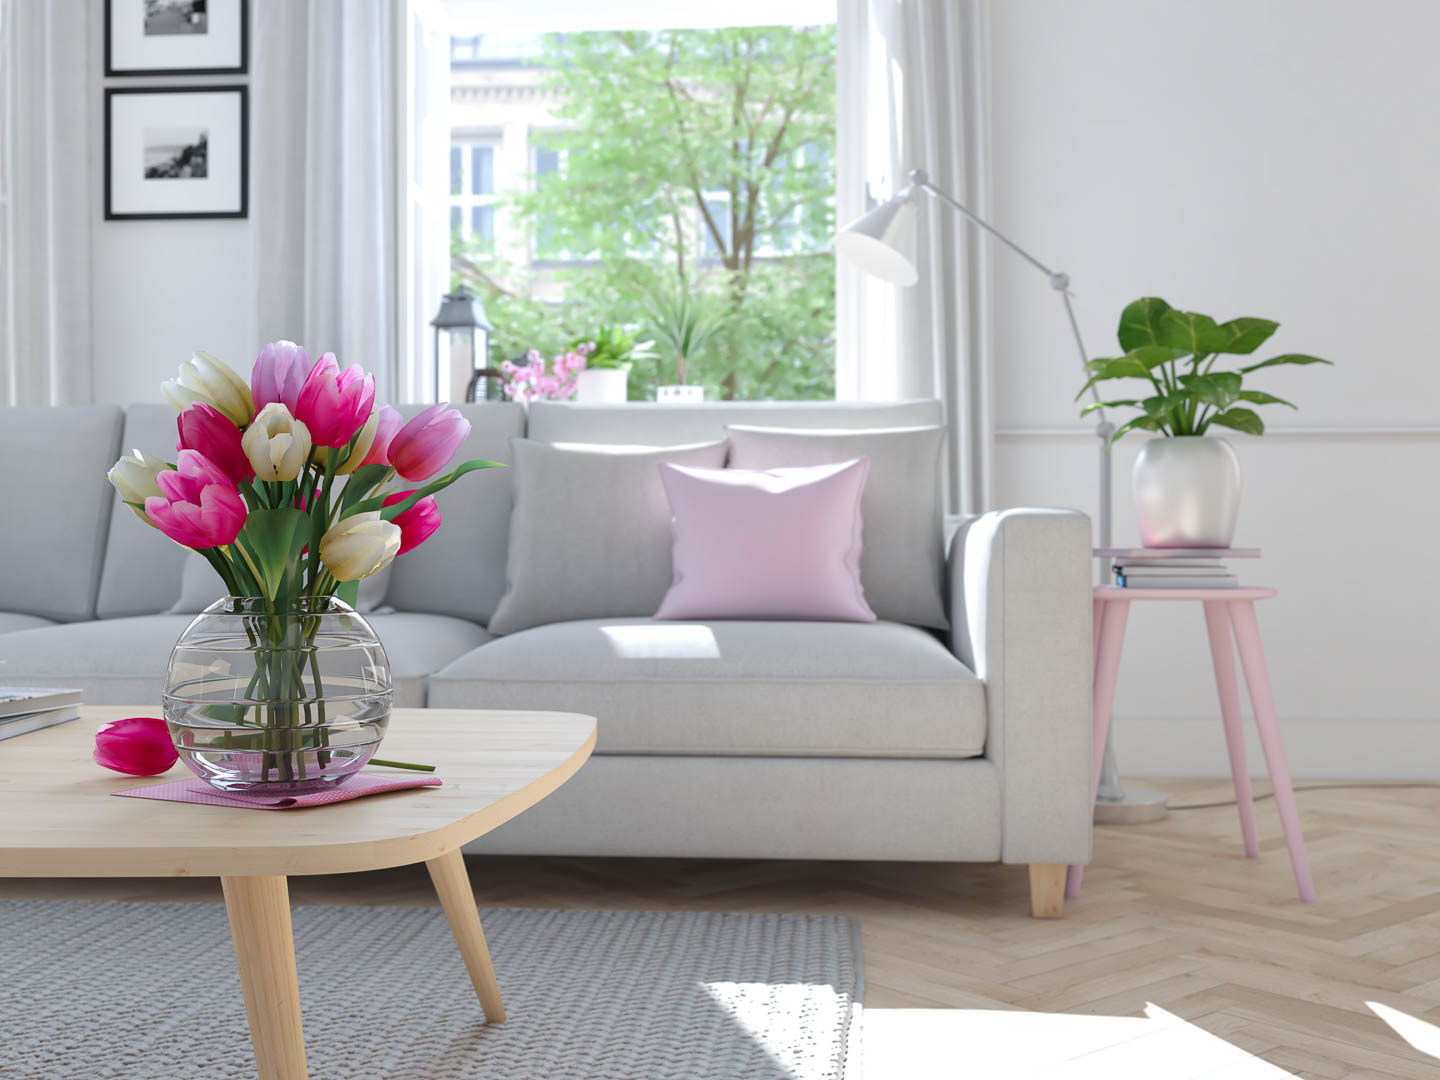 A gray living room with pink accents